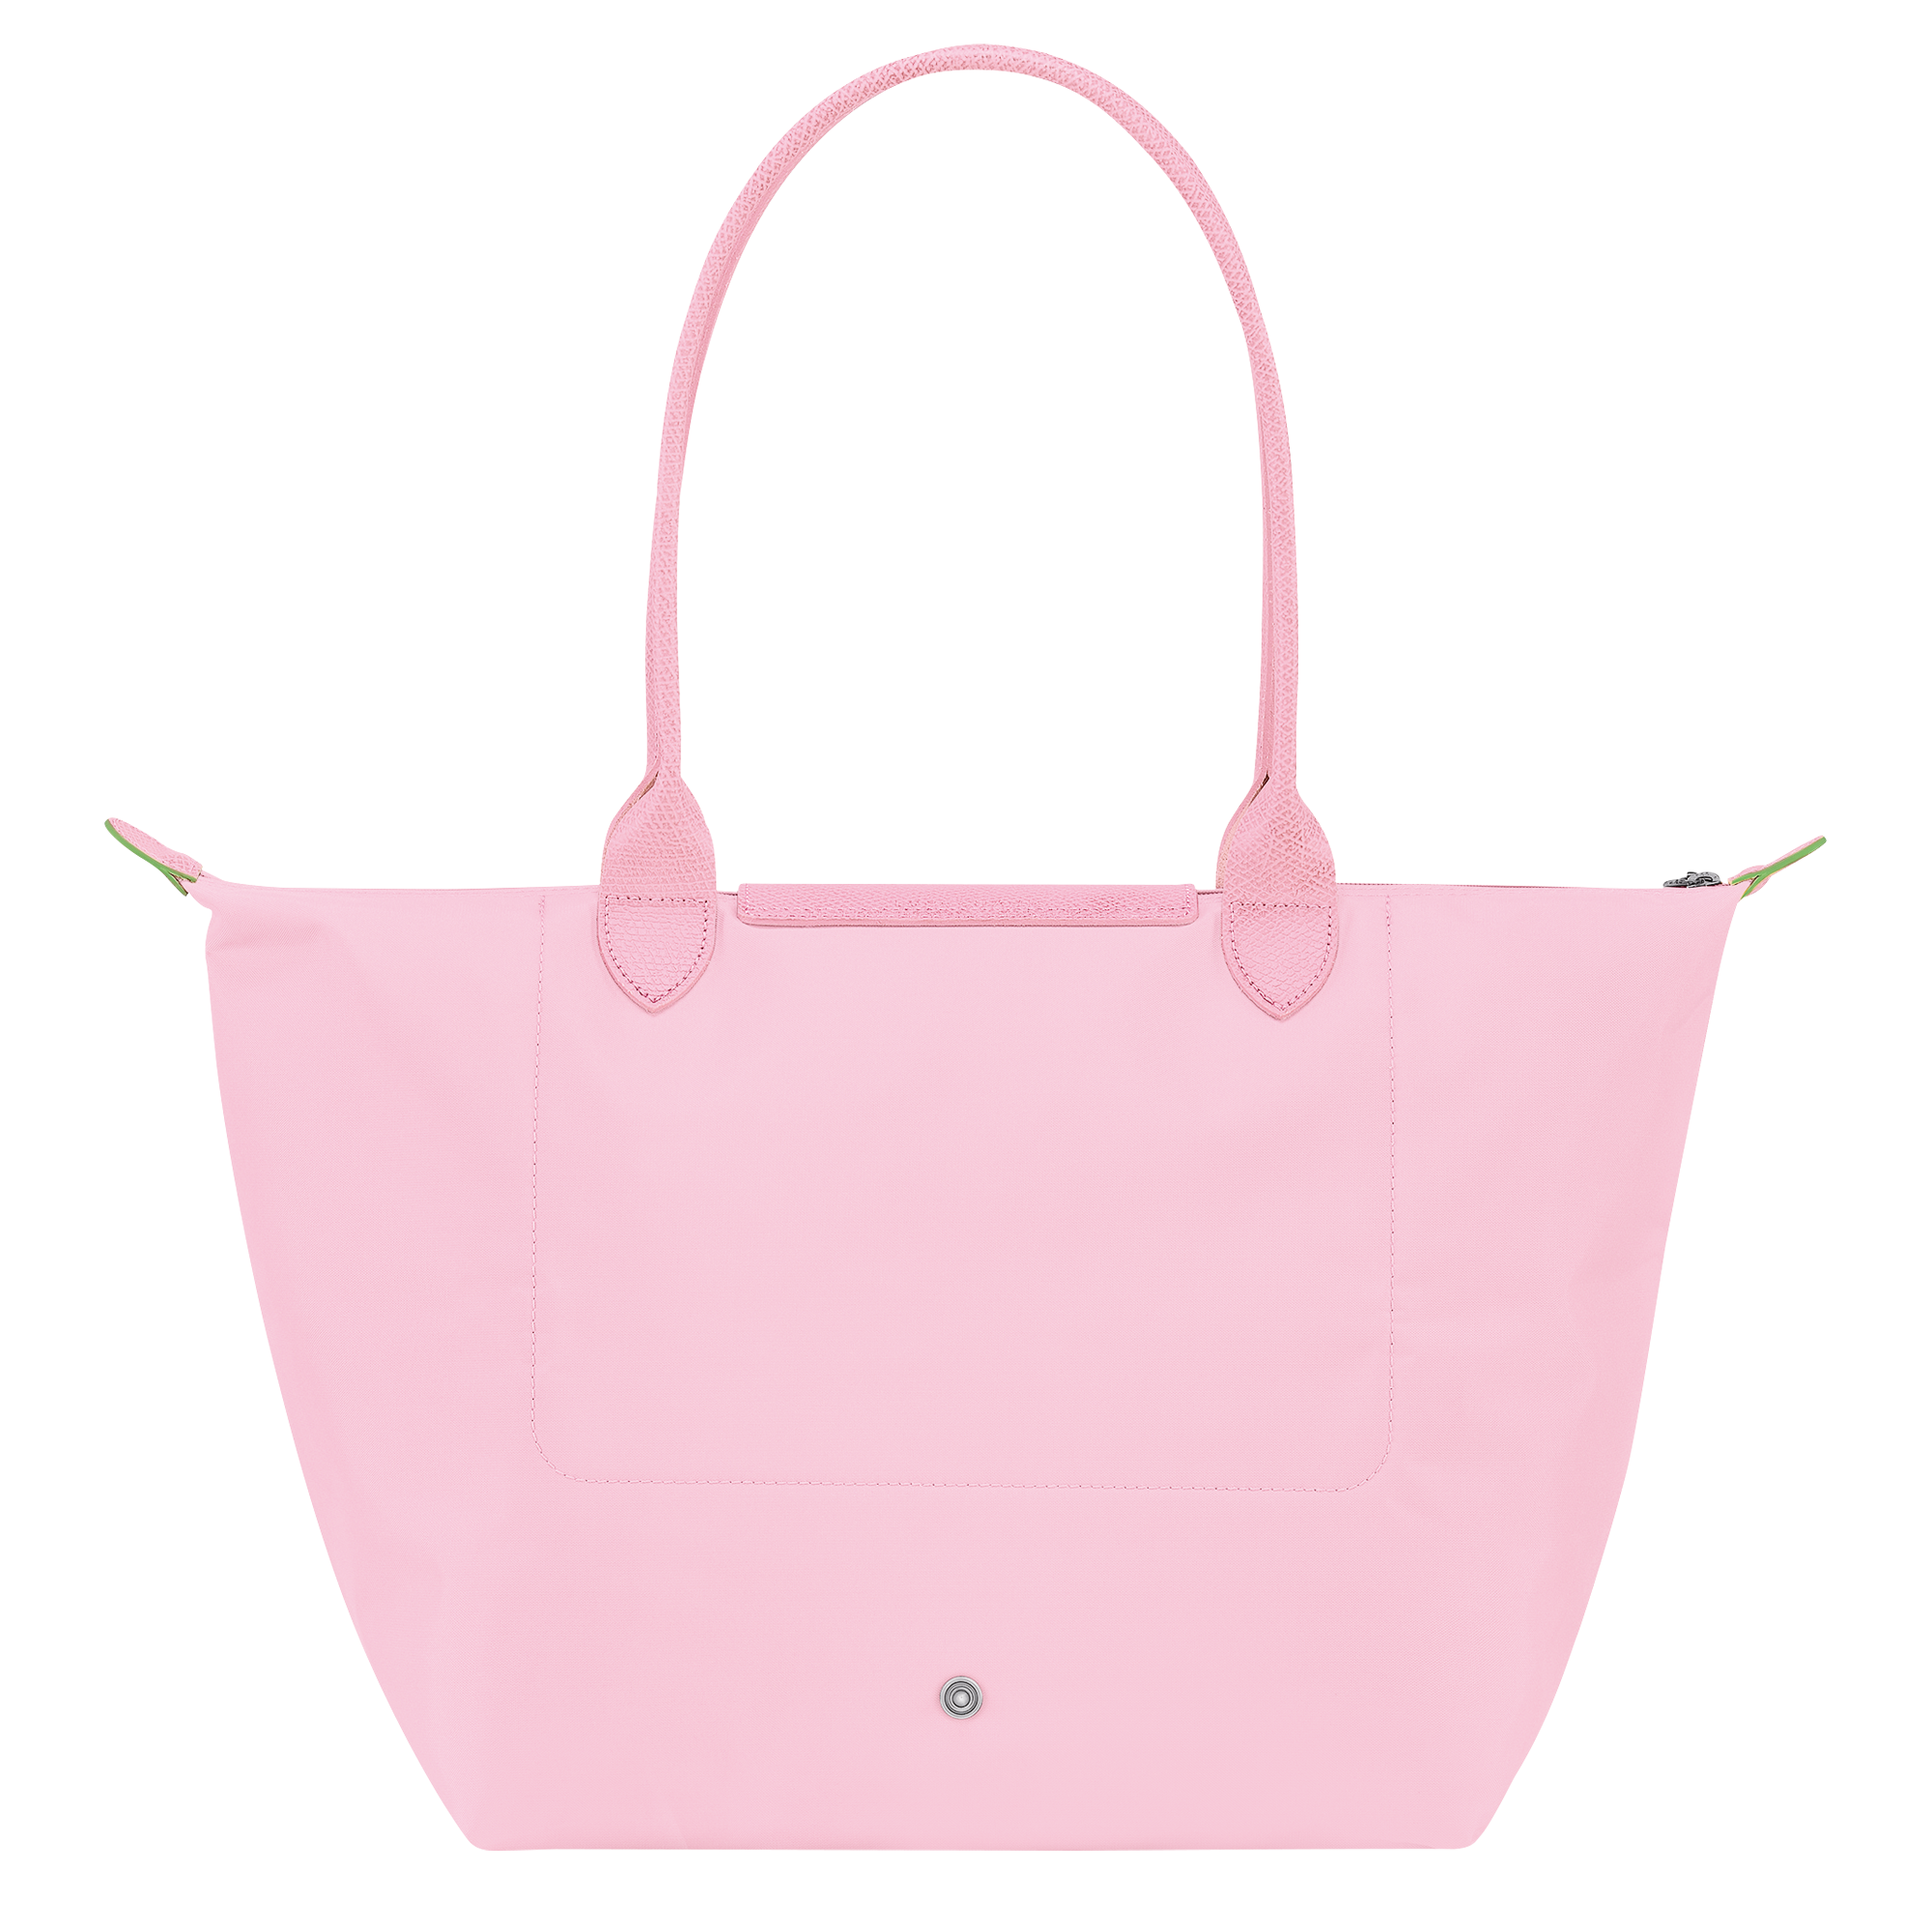 Le Pliage Green L Tote bag Pink - Recycled canvas (L1899919P75